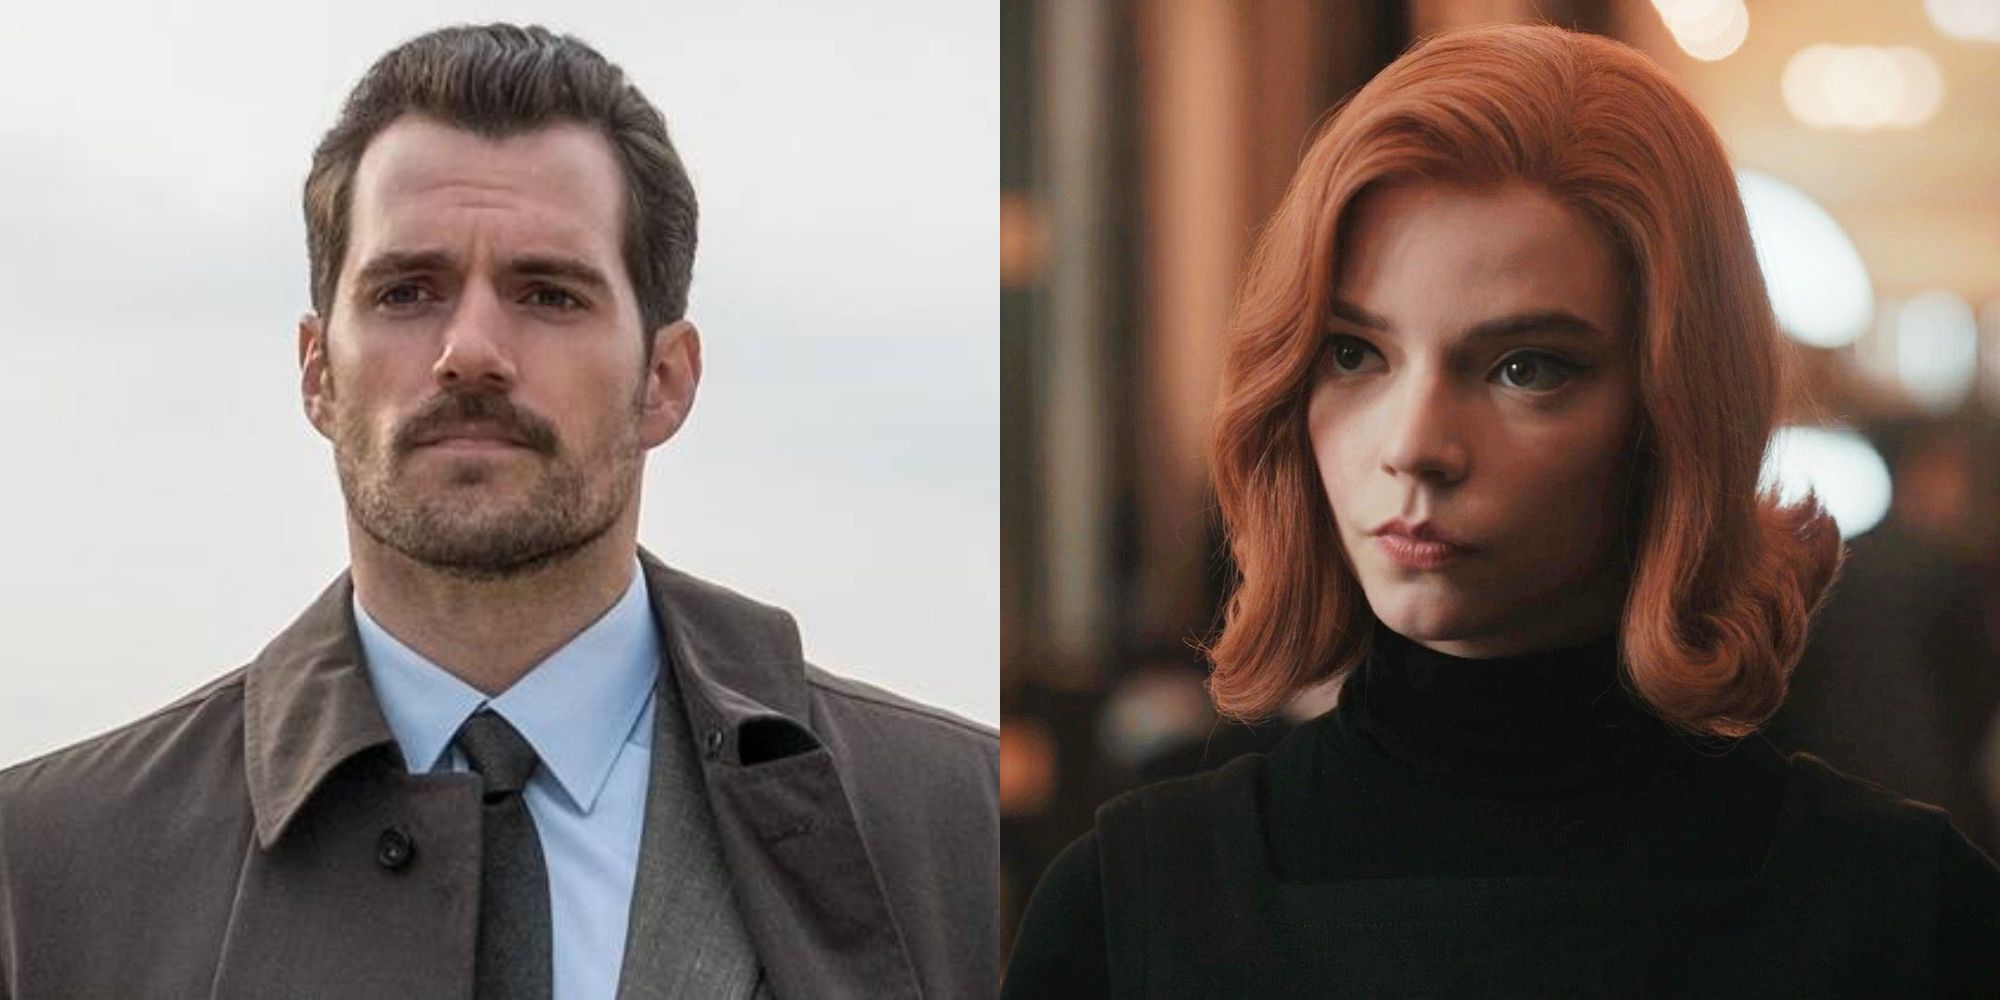 Split image showing Henry Cavill in Mission Impossible - Fallout and Anya Taylor-Joy in The Queen's Gambit.